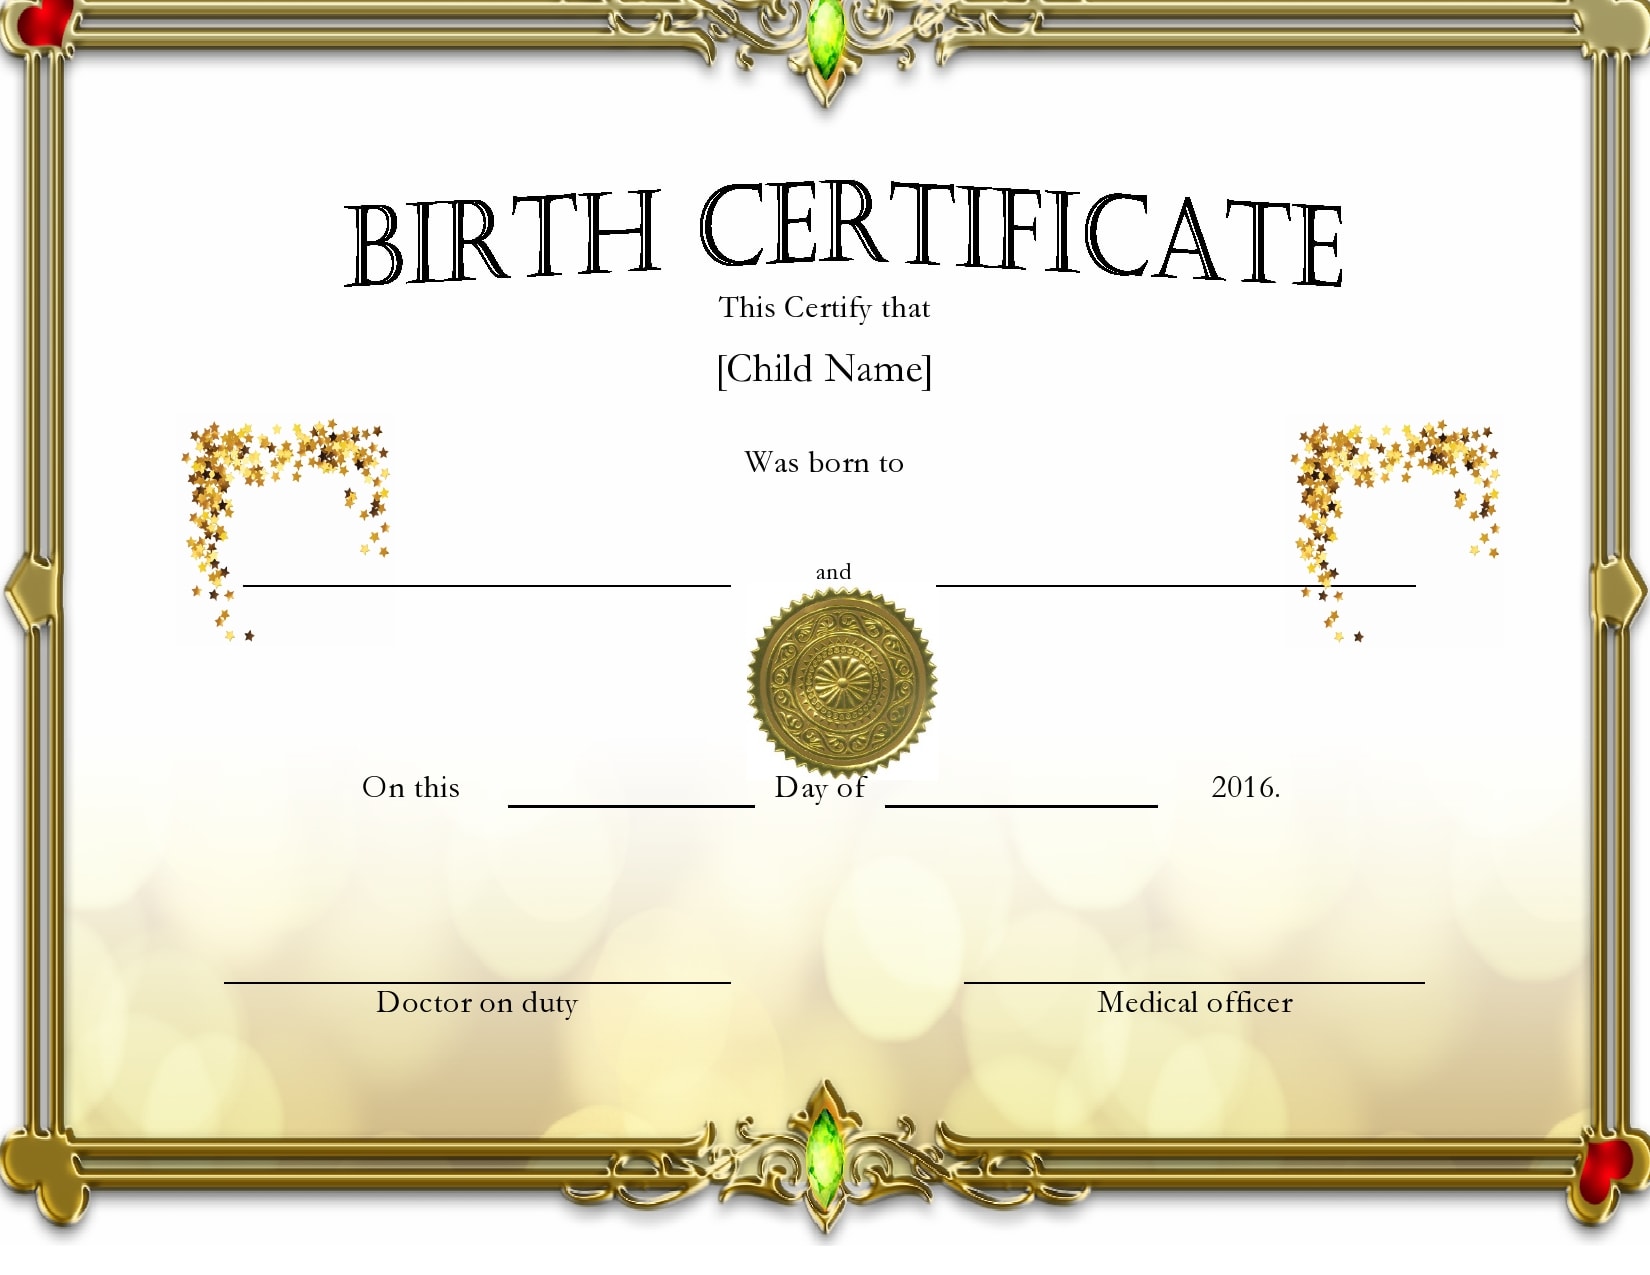 22 Blank Birth Certificate Templates (& Examples) - PrintableTemplates Intended For Birth Certificate Template Uk